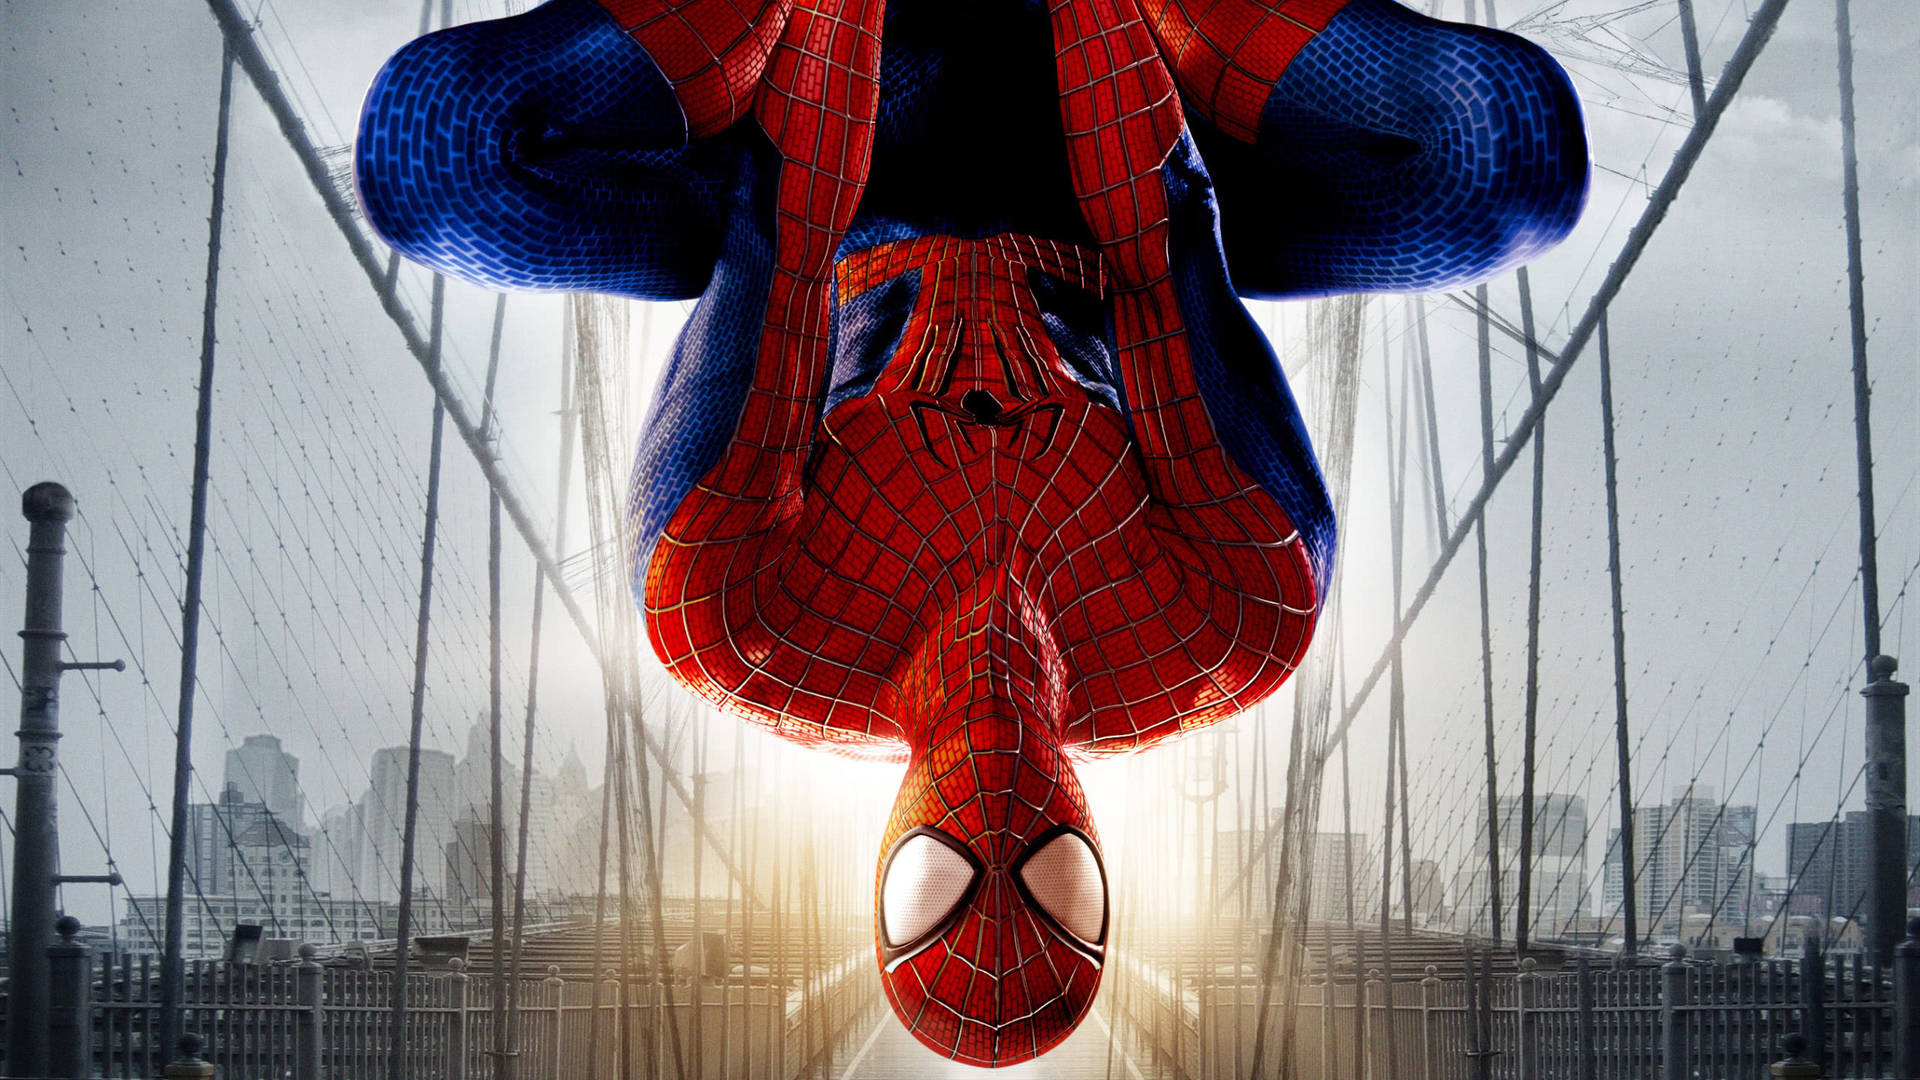 Peter Parker, AKA The Amazing Spider-Man, Zooms Across the City Wallpaper